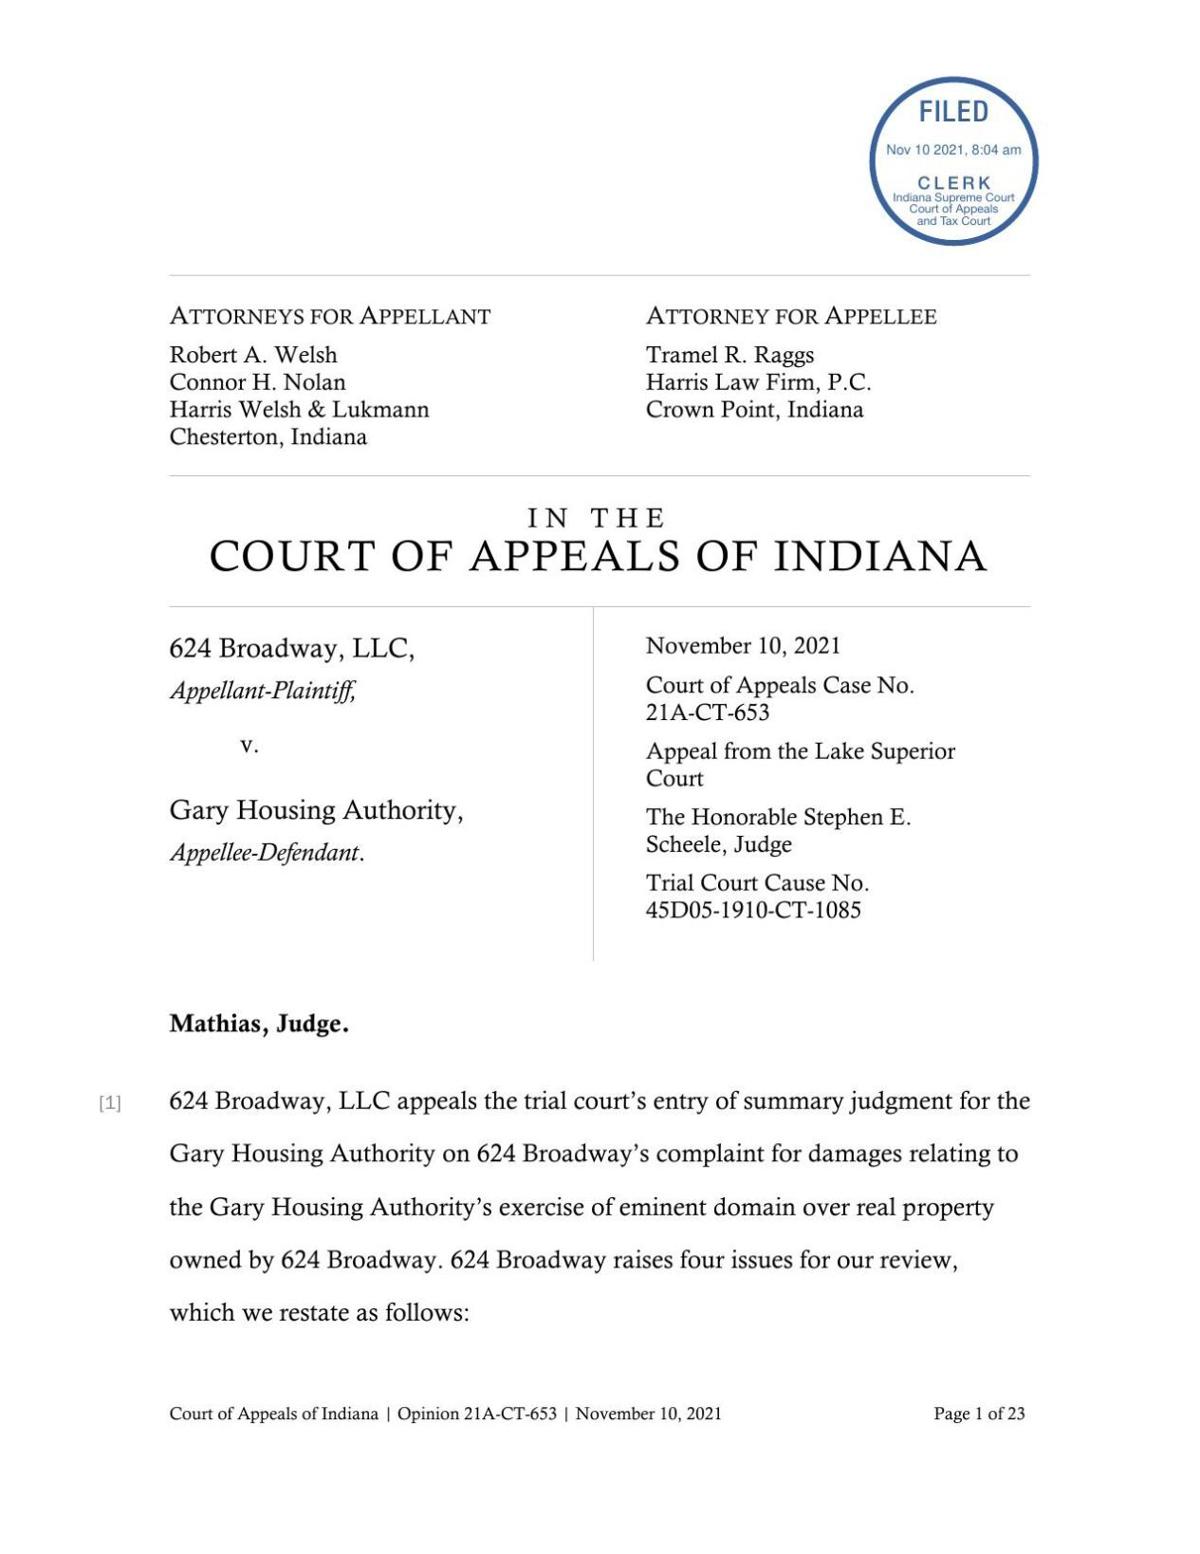 624 Broadway LLC v. Gary Housing Authority ruling of Indiana Court of Appeals (withdrawn Dec. 2, 2021)